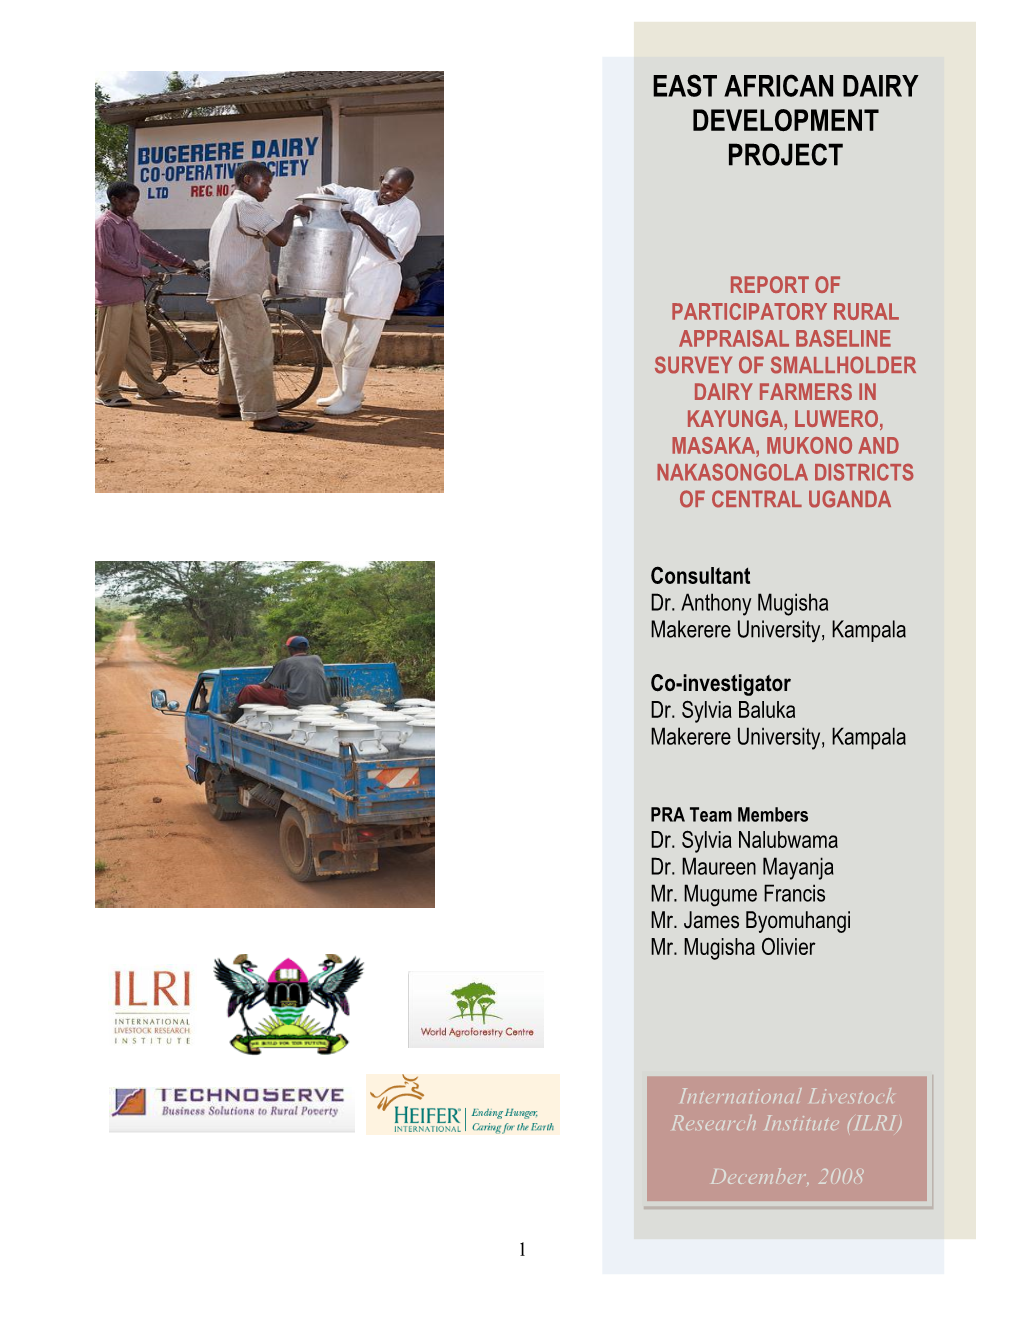 East African Dairy Development Project